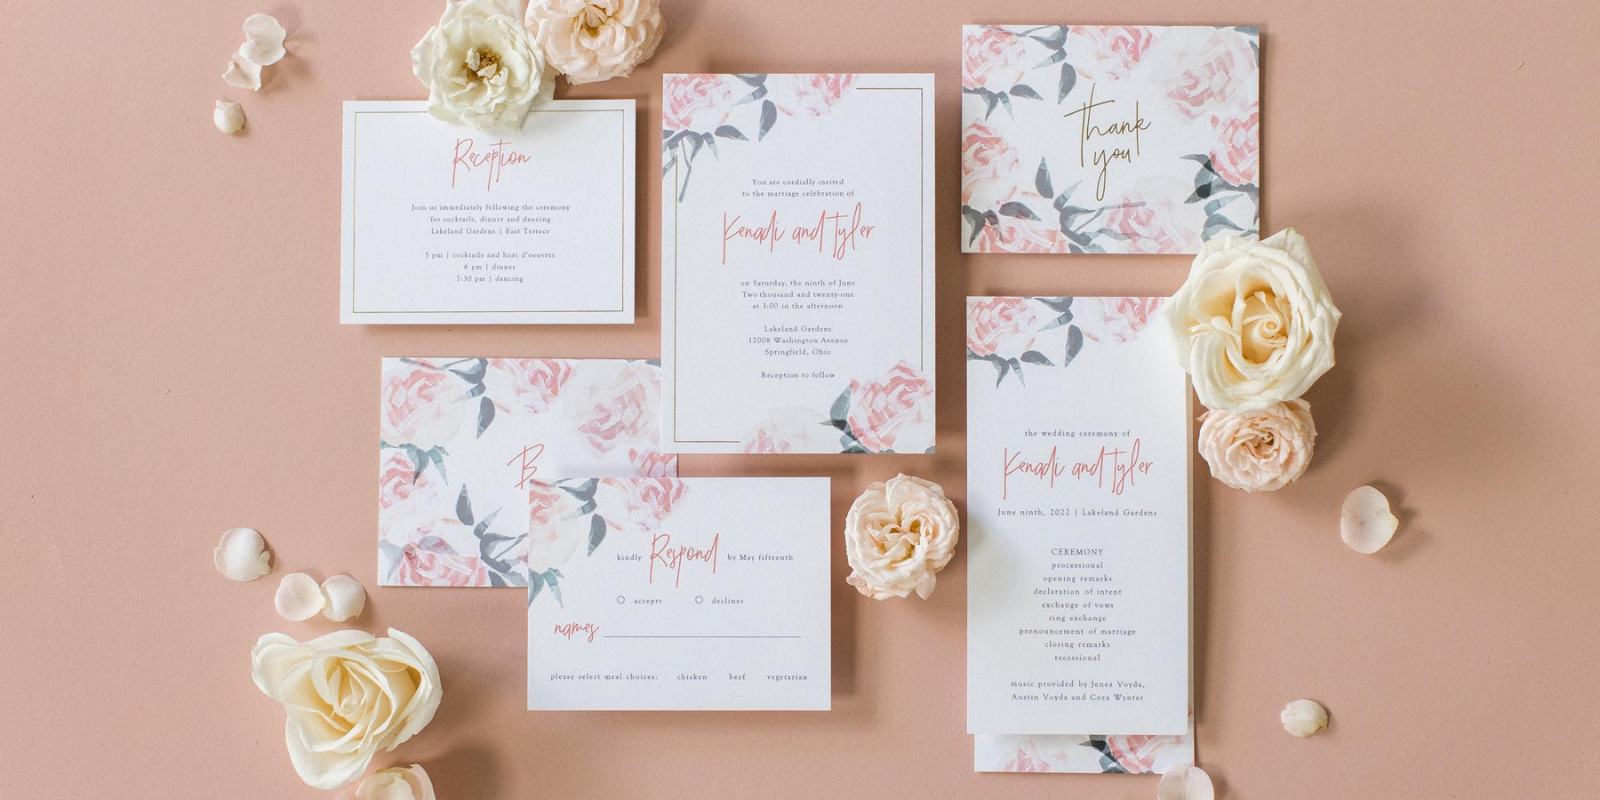 the-wedding-invitation-and-stationery-timeline